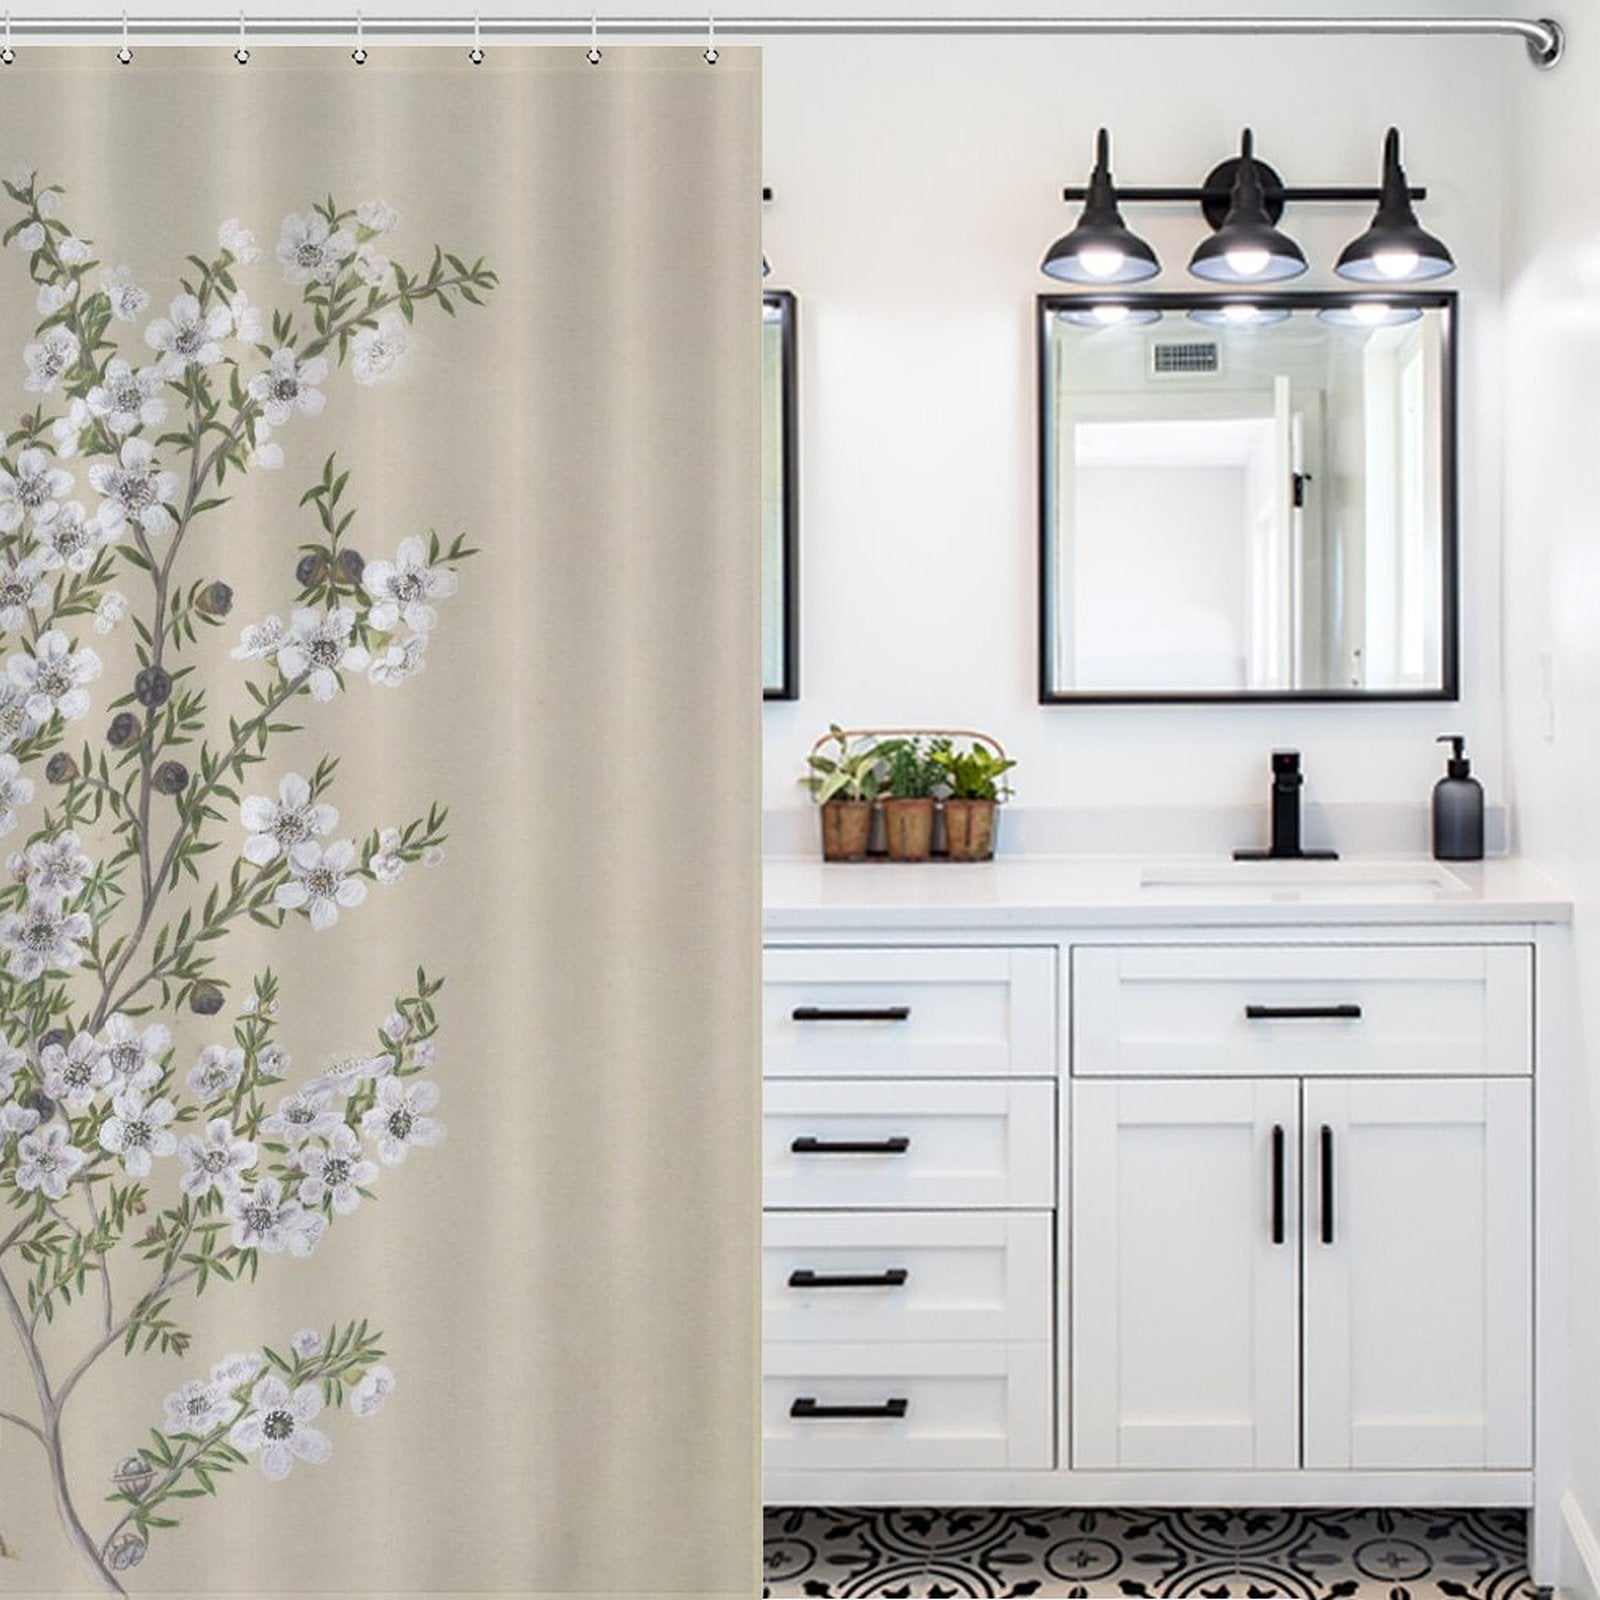 A nature-themed bathroom featuring a Retro Green Flower Shower Curtain-Cottoncat by Cotton Cat, white vanity with double sinks, black fixtures, two mirrors, and potted plants.